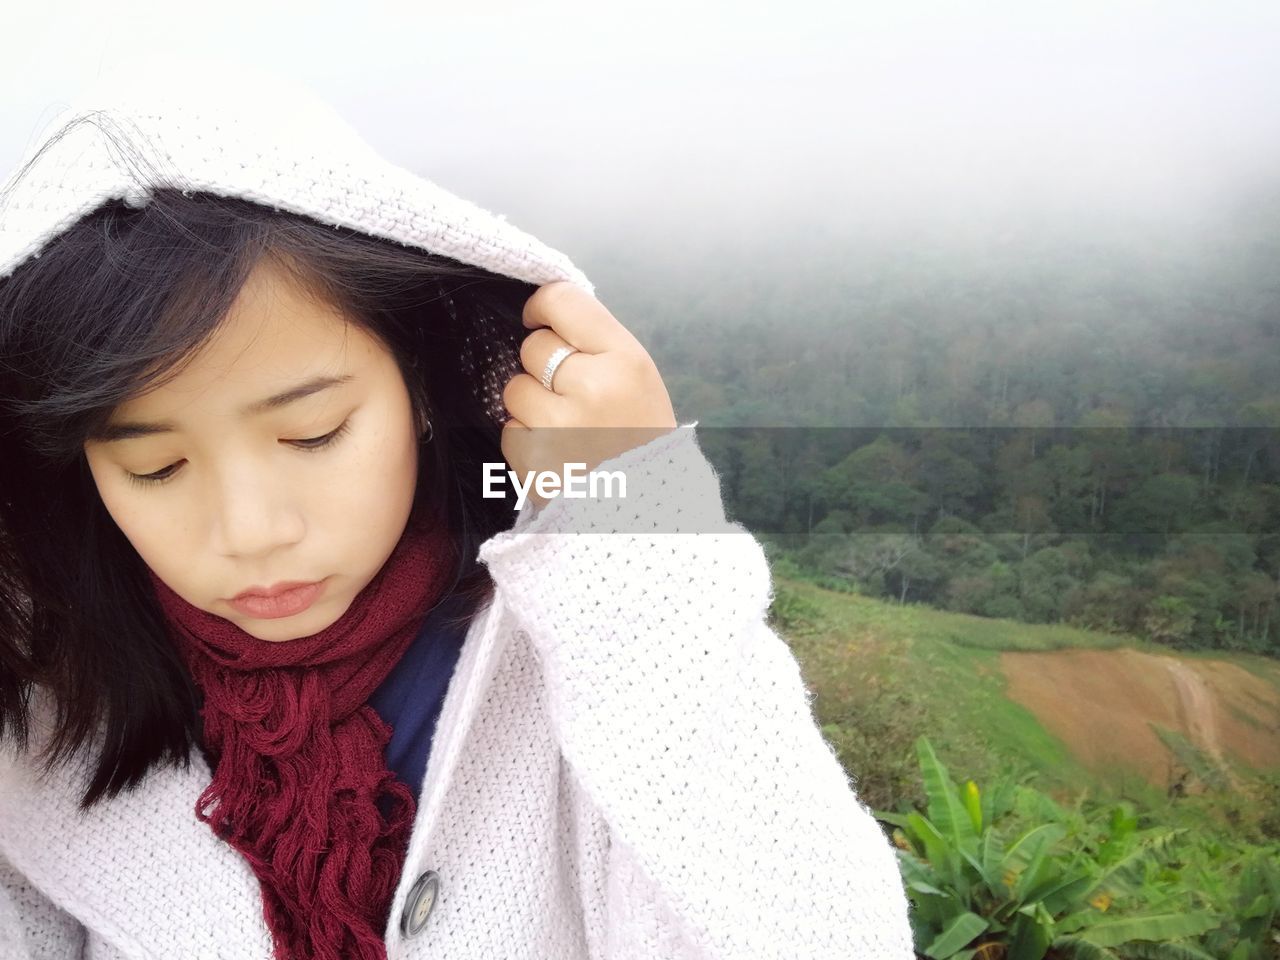 Thoughtful young woman wearing hooded sweater against green landscape